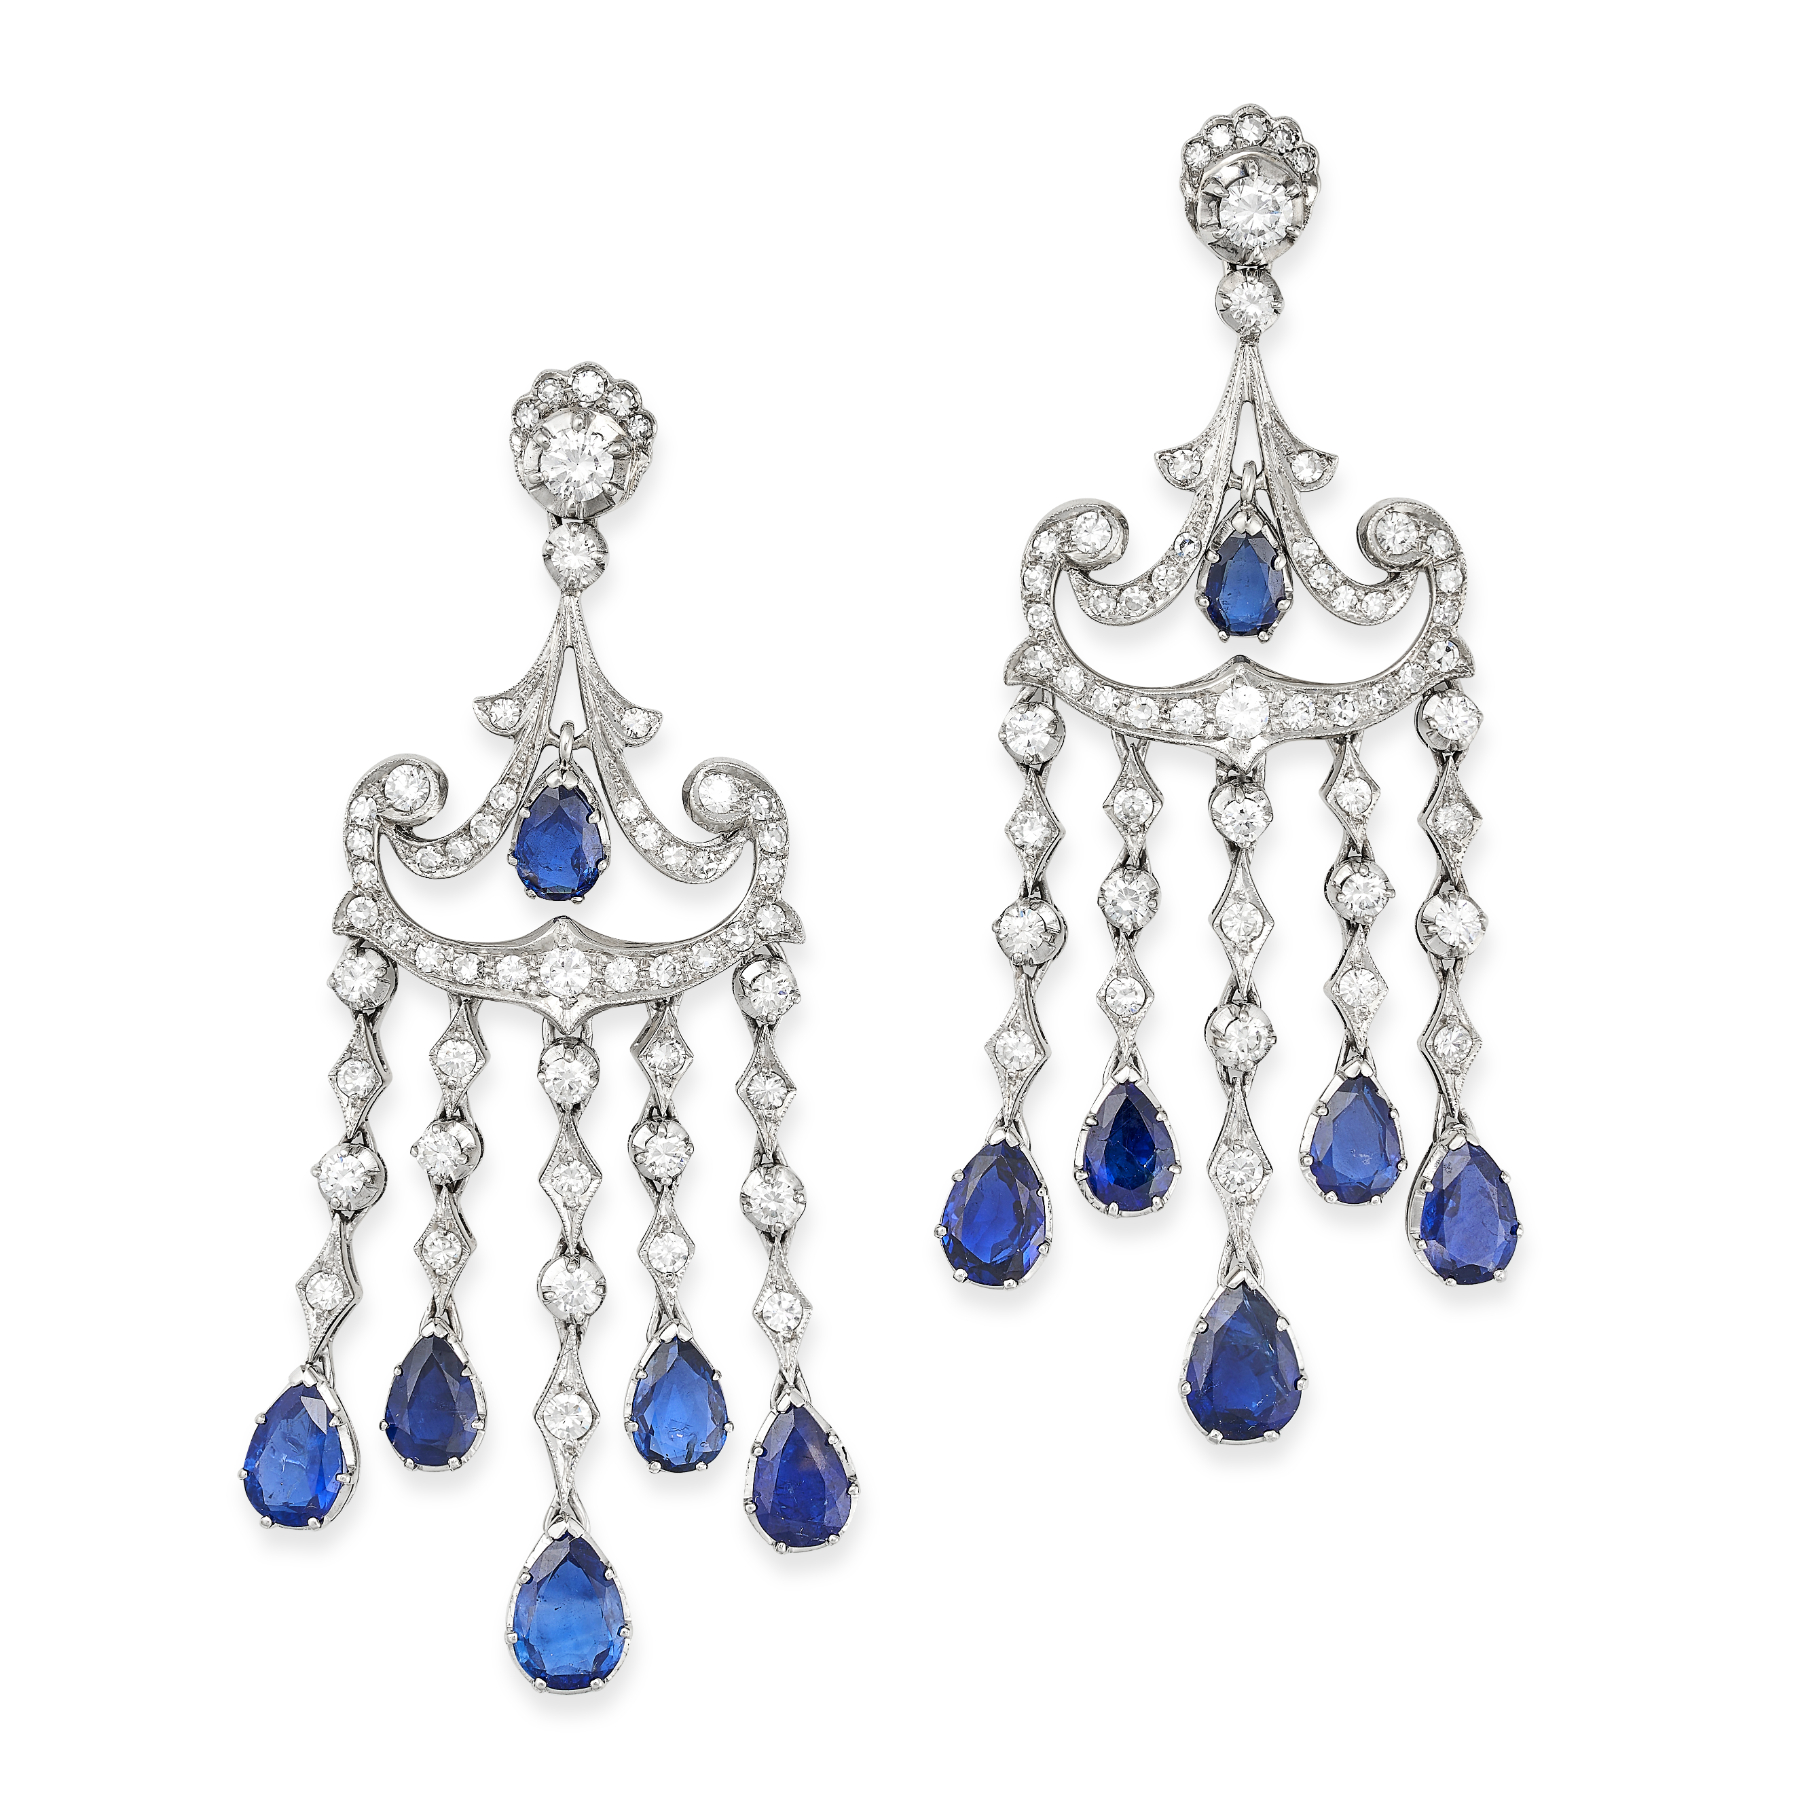 A PAIR OF BURMA NO HEAT SAPPHIRE AND DIAMOND CHANDELIER EARRINGS in 18ct white gold, each earring in